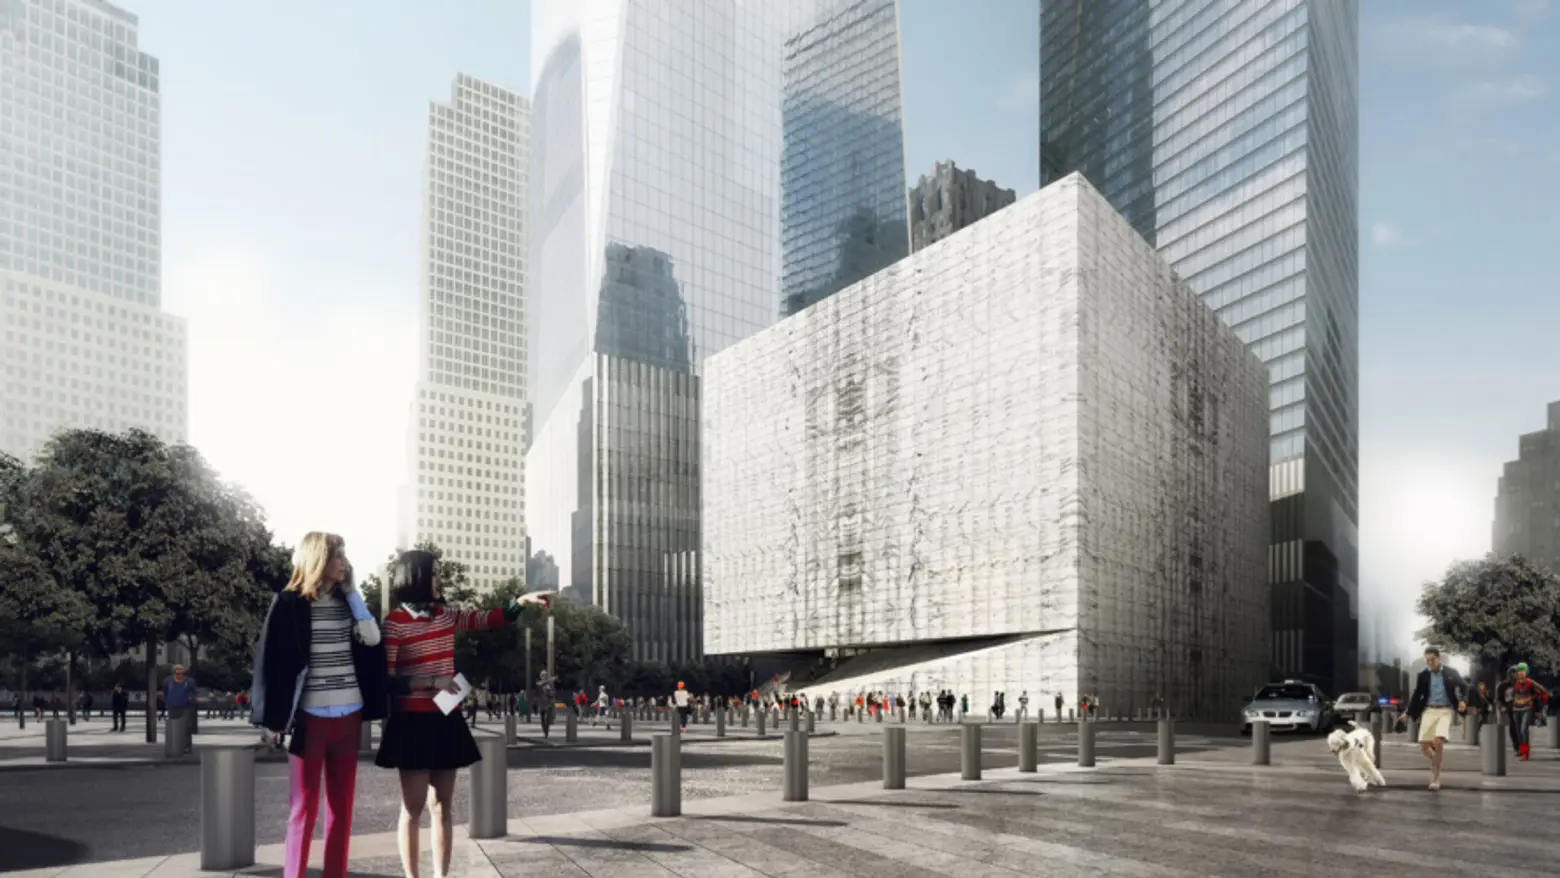 Construction is underway at the World Trade Center performing arts center